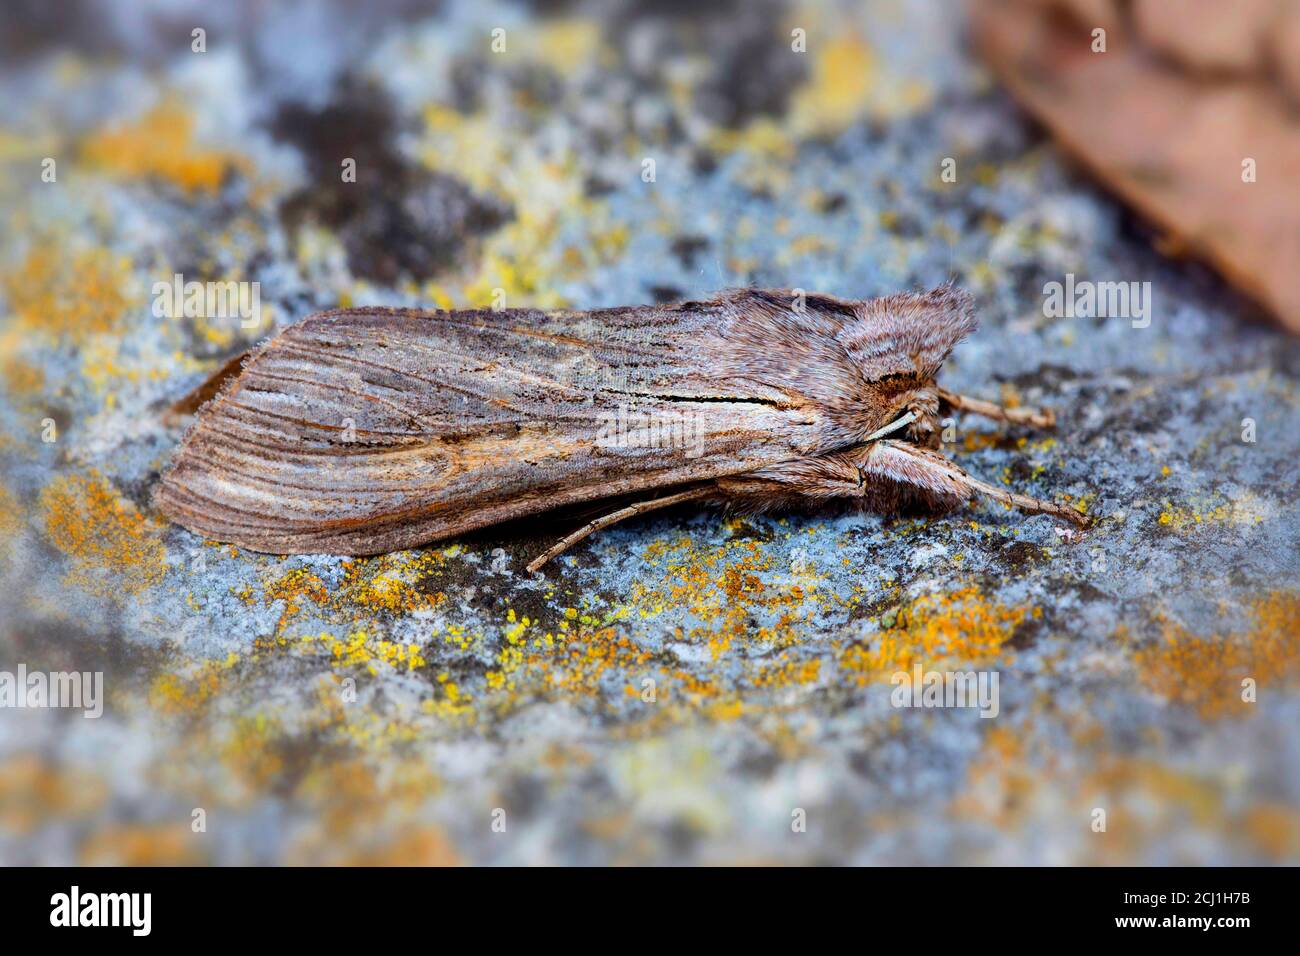 shark moth (Cucullia umbratica), sits on a stone covered with lichens, Germany Stock Photo